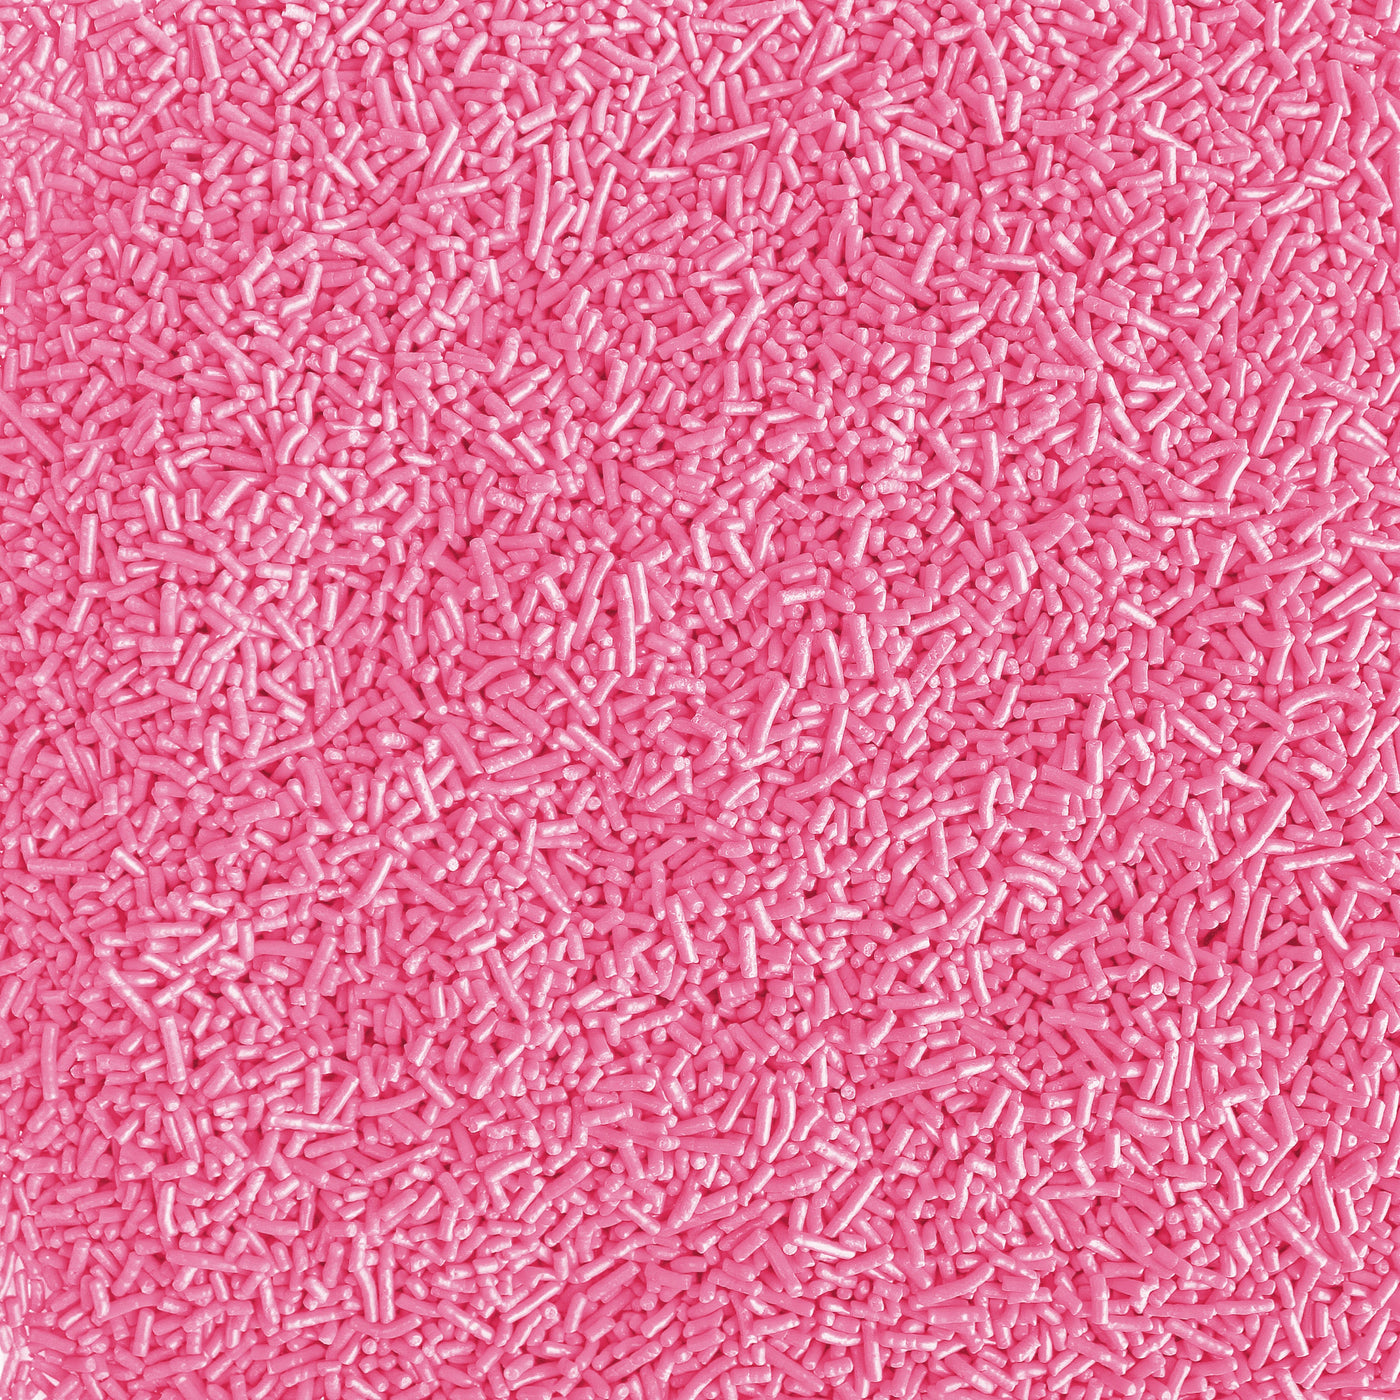 Blush pink sprinkles for decorating cakes, cupcakes, cookies, ice cream, and other sweet treats